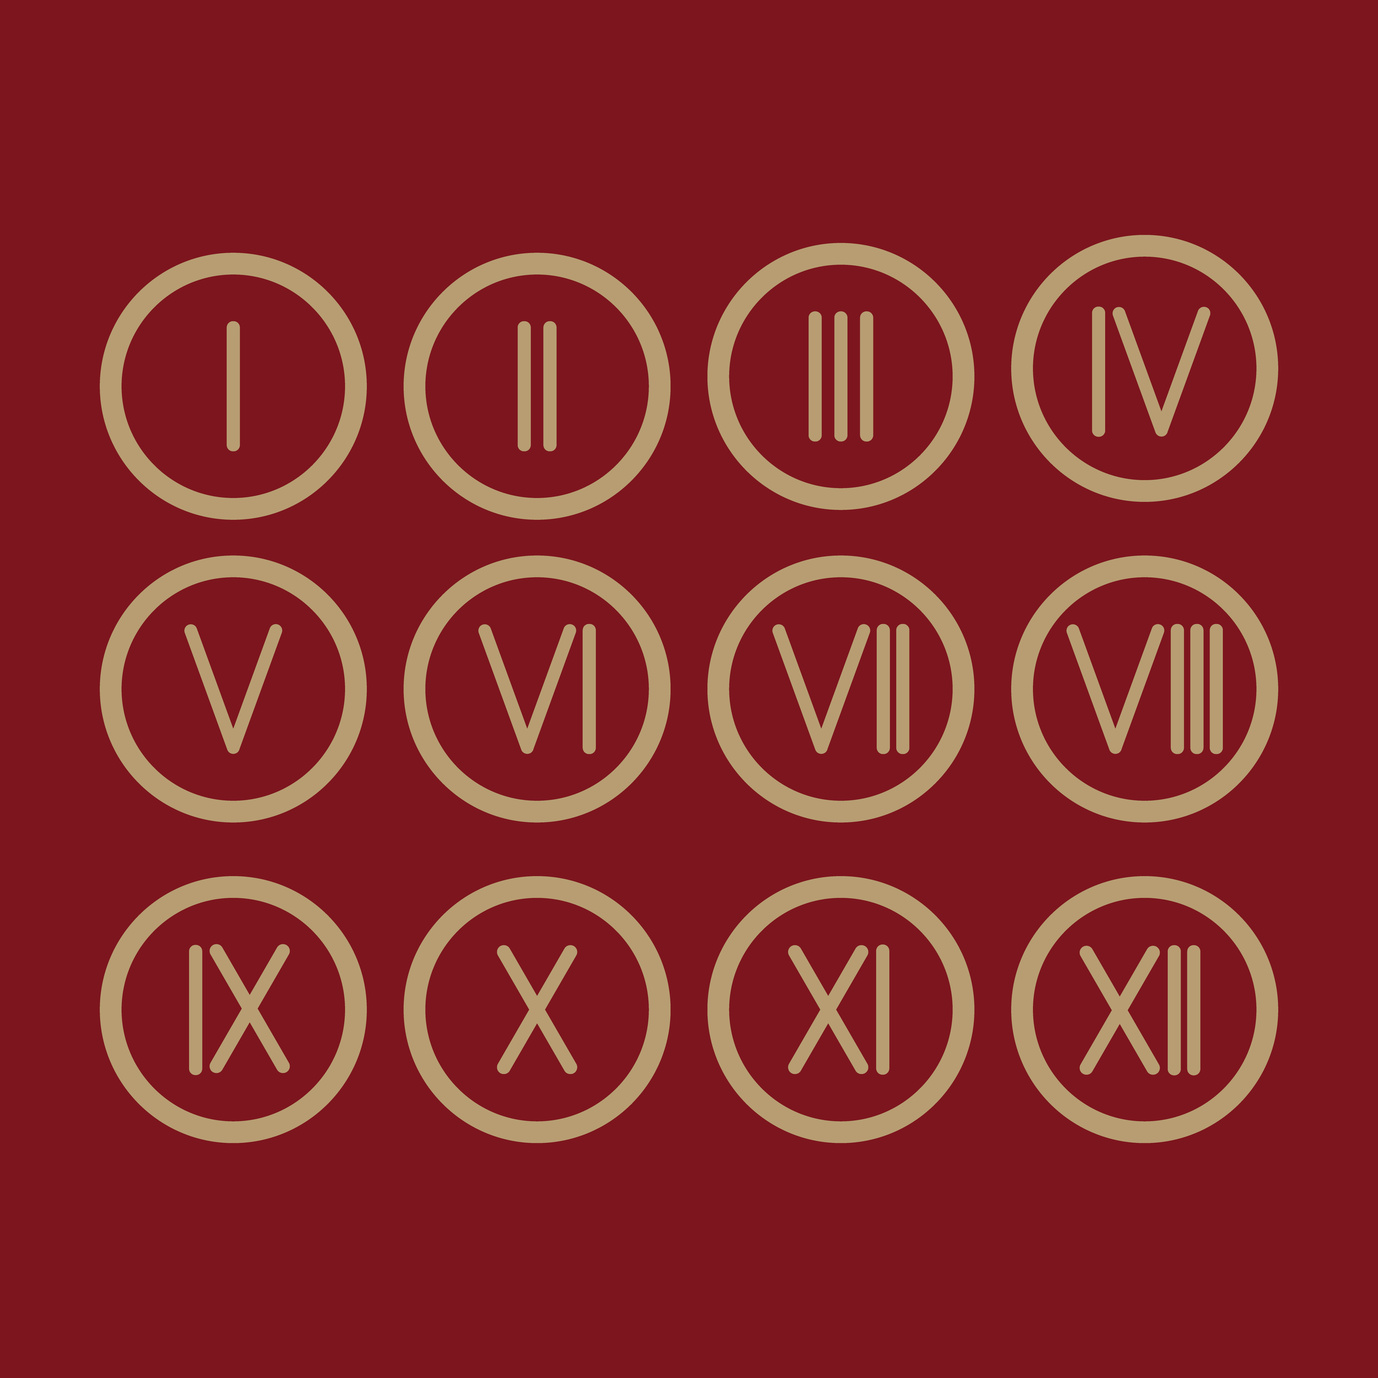 Building Roman Numerals in a Day with Ruby Metaprogramming